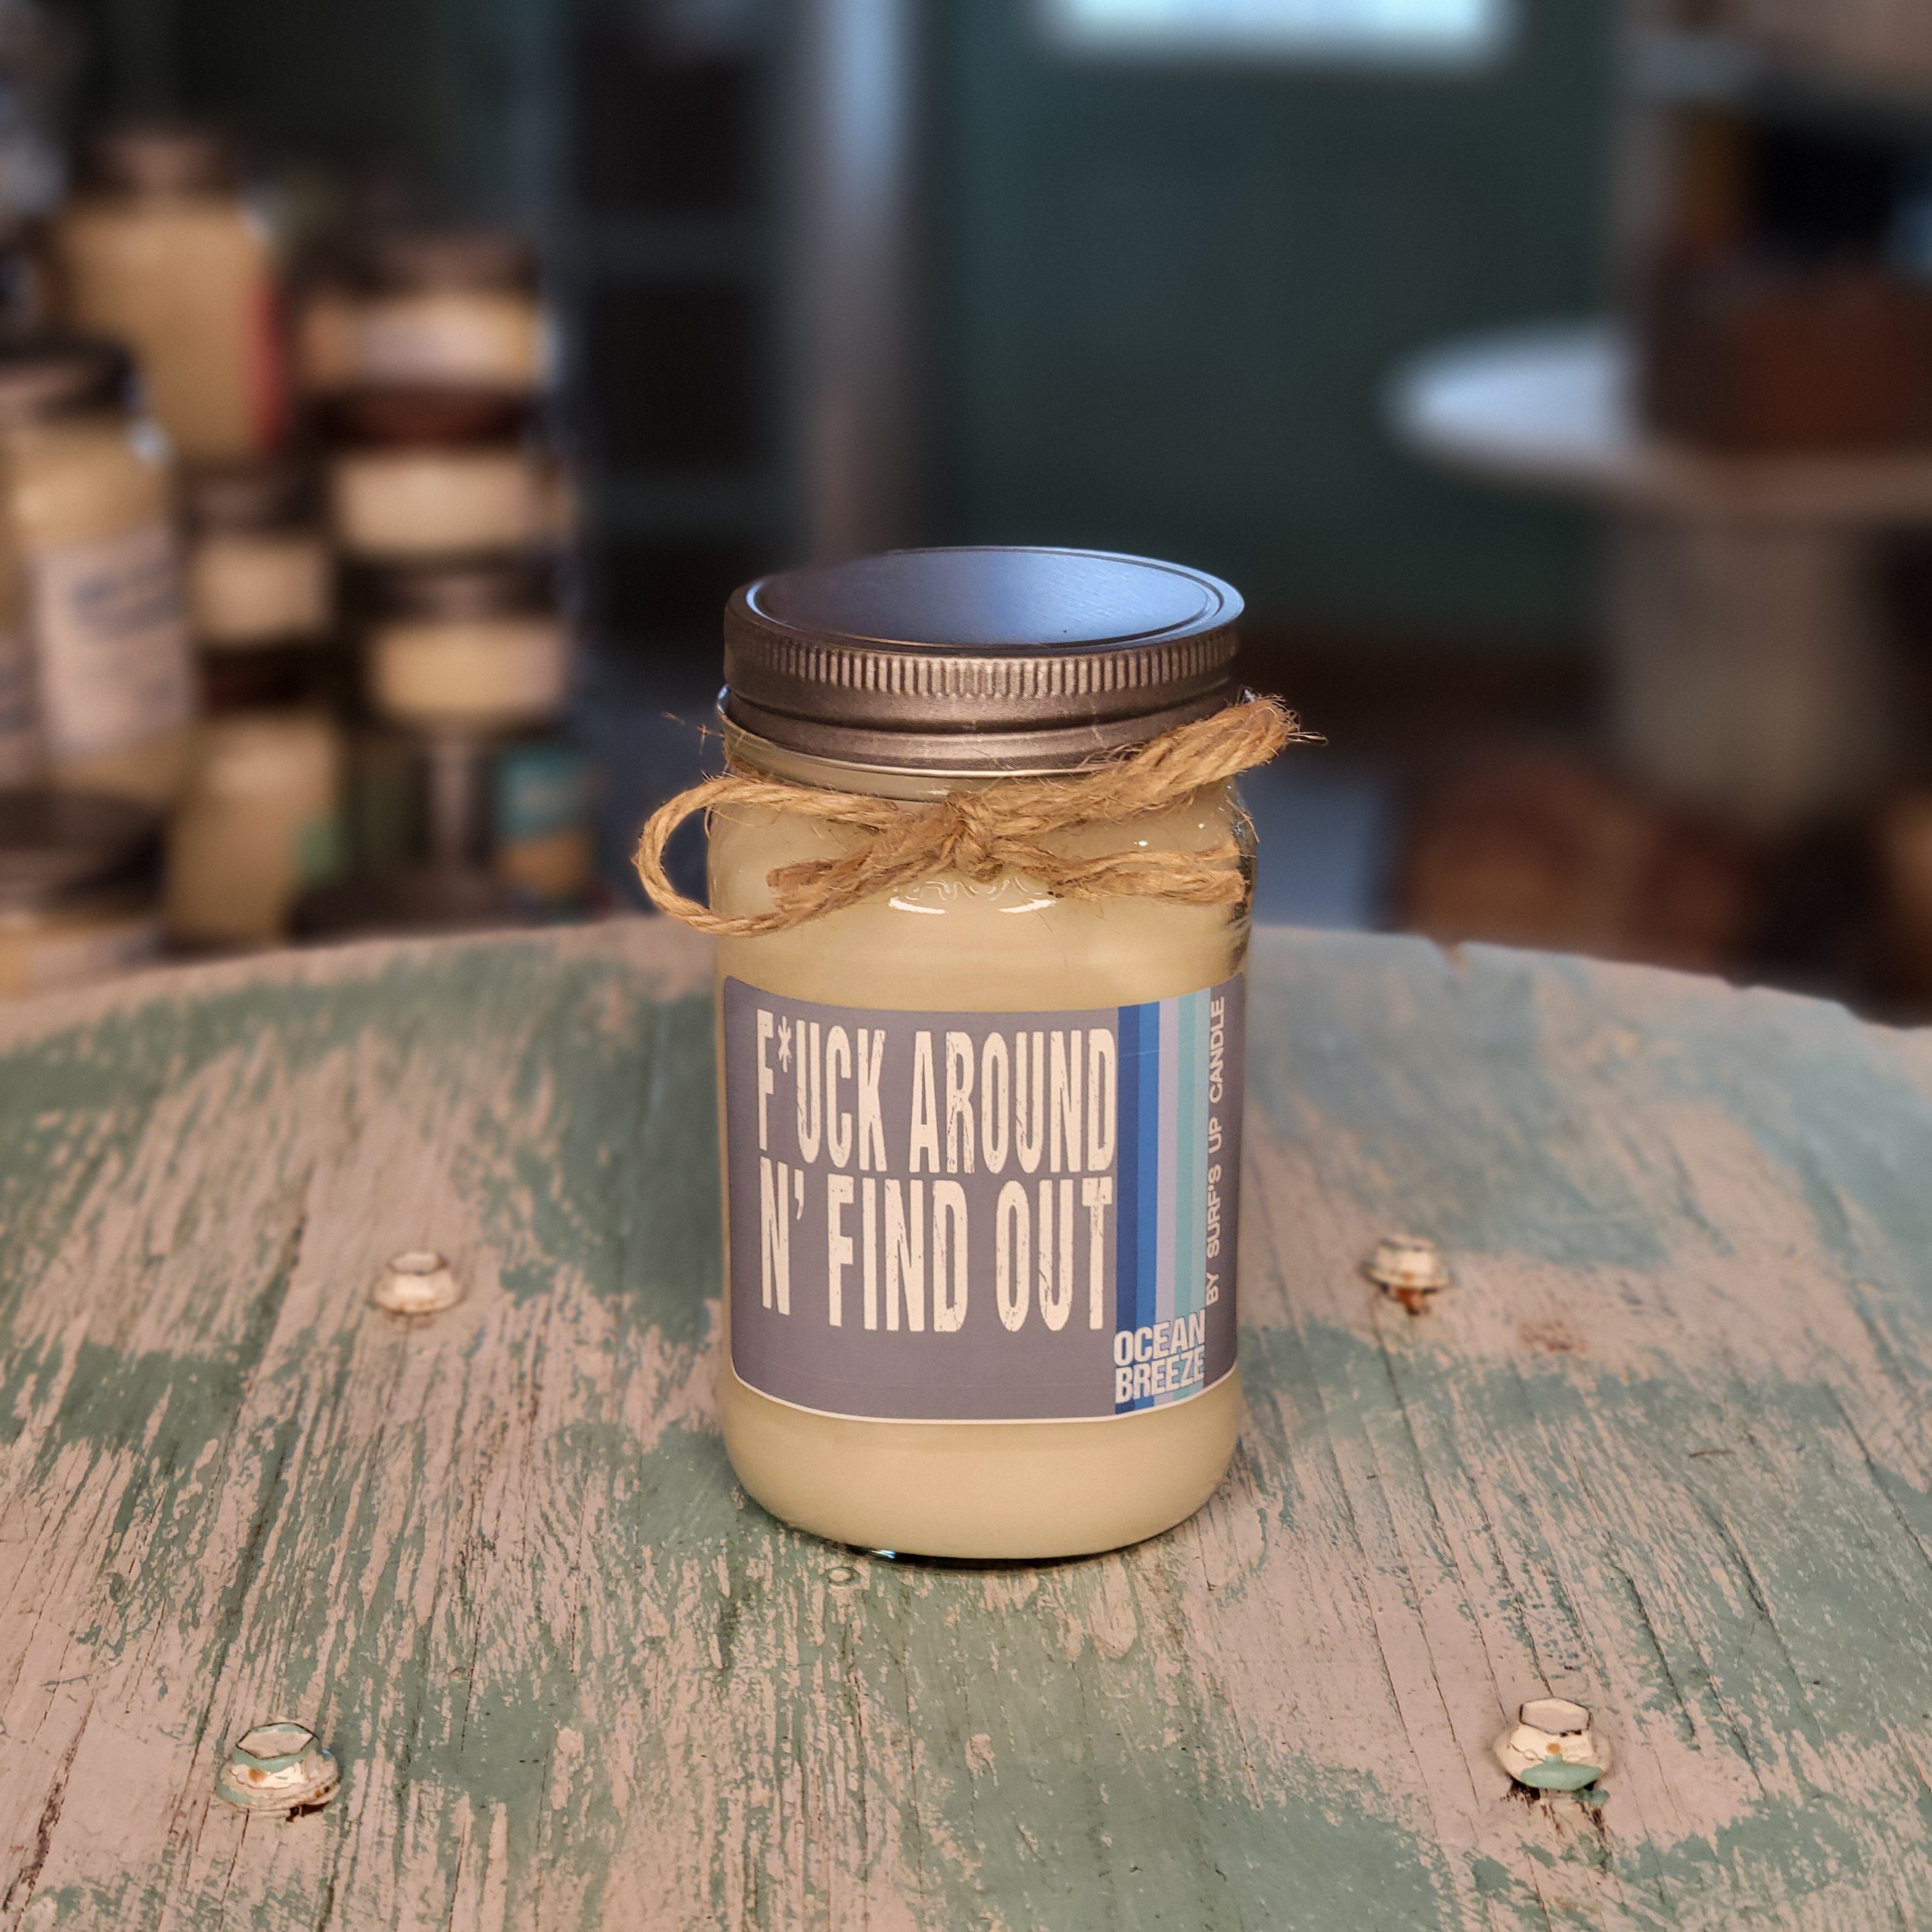 F*ck Around Ocean Breeze Mason Jar Candle - Not Your Mother's Collection